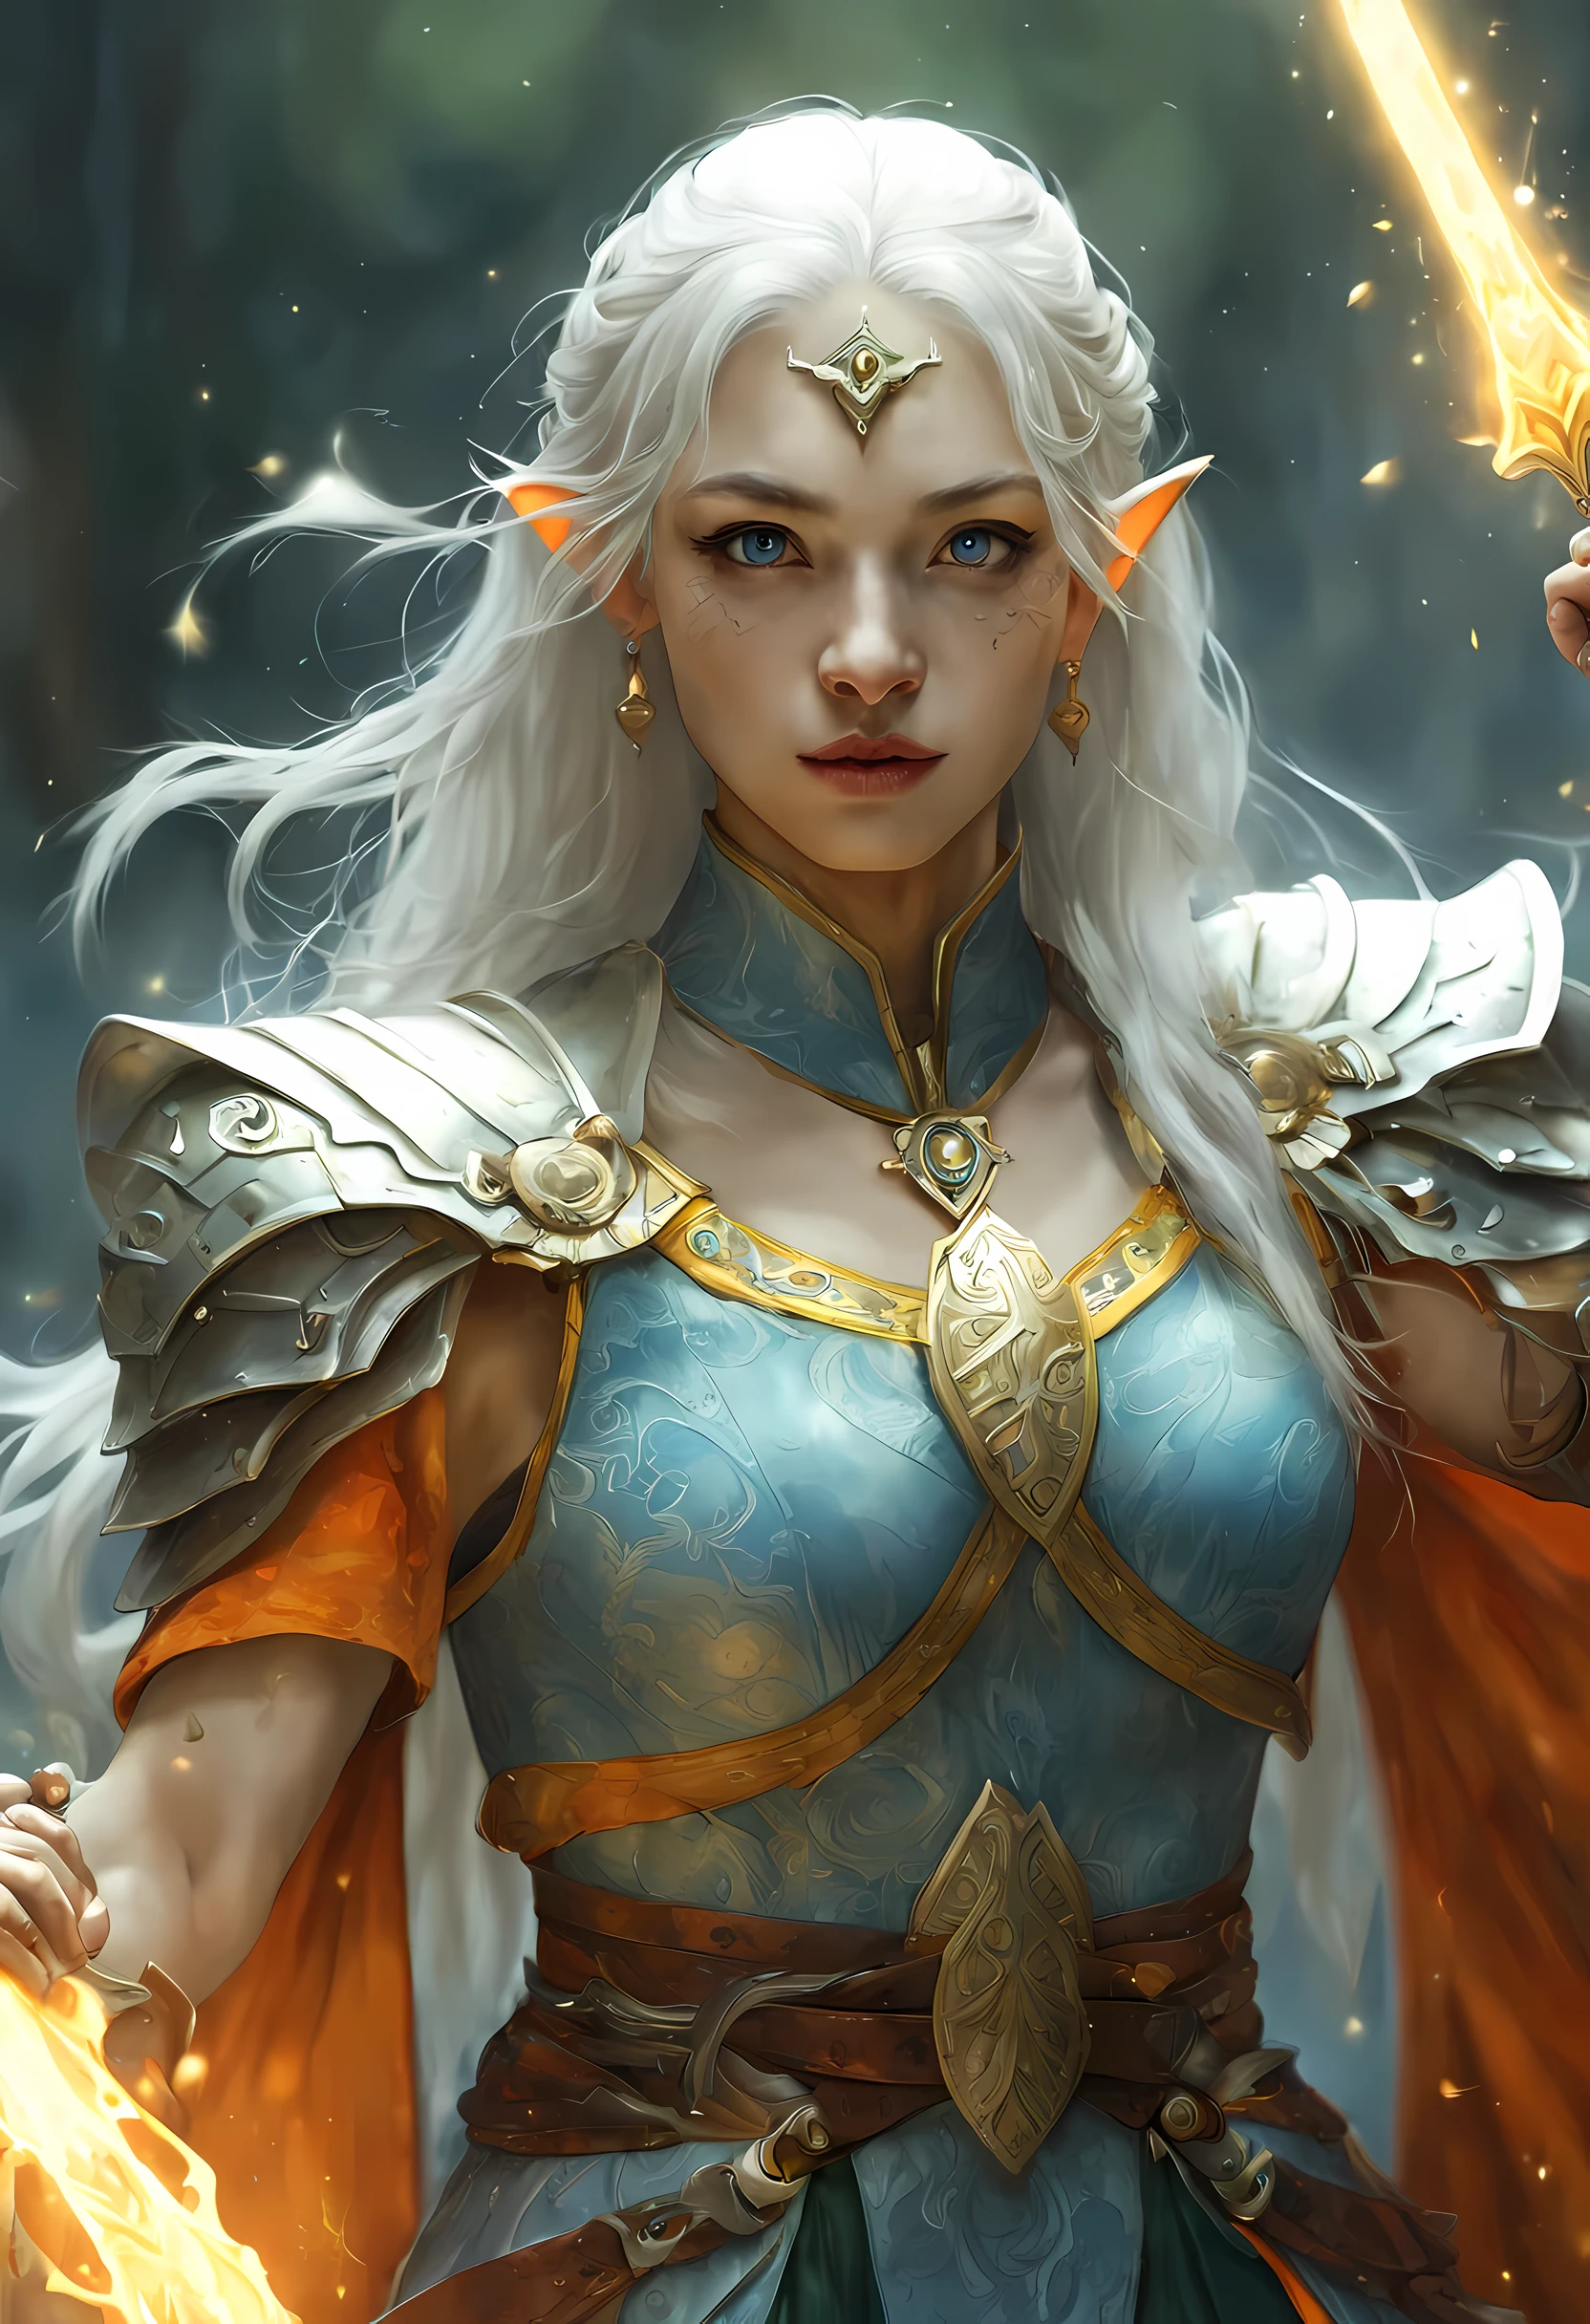 fantasy art, dnd art, RPG art, wide shot, (masterpiece: 1.4) a (portrait: 1.3) intense details, highly detailed, photorealistic, best quality, highres, GlowingRunesAI_yellow, portrait a female (fantasy art, Masterpiece, best quality: 1.3) bl3uprint (blue skin: 1.5, intense details facial details, exquisite beauty, (fantasy art, Masterpiece, best quality) cleric, (blue: 1.3) skinned female, (white hair: 1.3), long hair, intense (green: 1.3) eye, fantasy art, Masterpiece, best quality) armed a fiery sword red fire, wearing heavy (white: 1.3) half plate mail armor, wearing high heeled laced boots, wearing an(orange :1.3) cloak, wearing glowing holy symbol GlowingRunes_yellow, within fantasy temple background, reflection light, high details, best quality, 16k, [ultra detailed], masterpiece, best quality, (extremely detailed), close up, ultra wide shot, photorealistic, RAW, fantasy art, dnd art, fantasy art, realistic art,((best quality)), ((masterpiece)), (detailed), perfect face, ((no ears: 1.6))